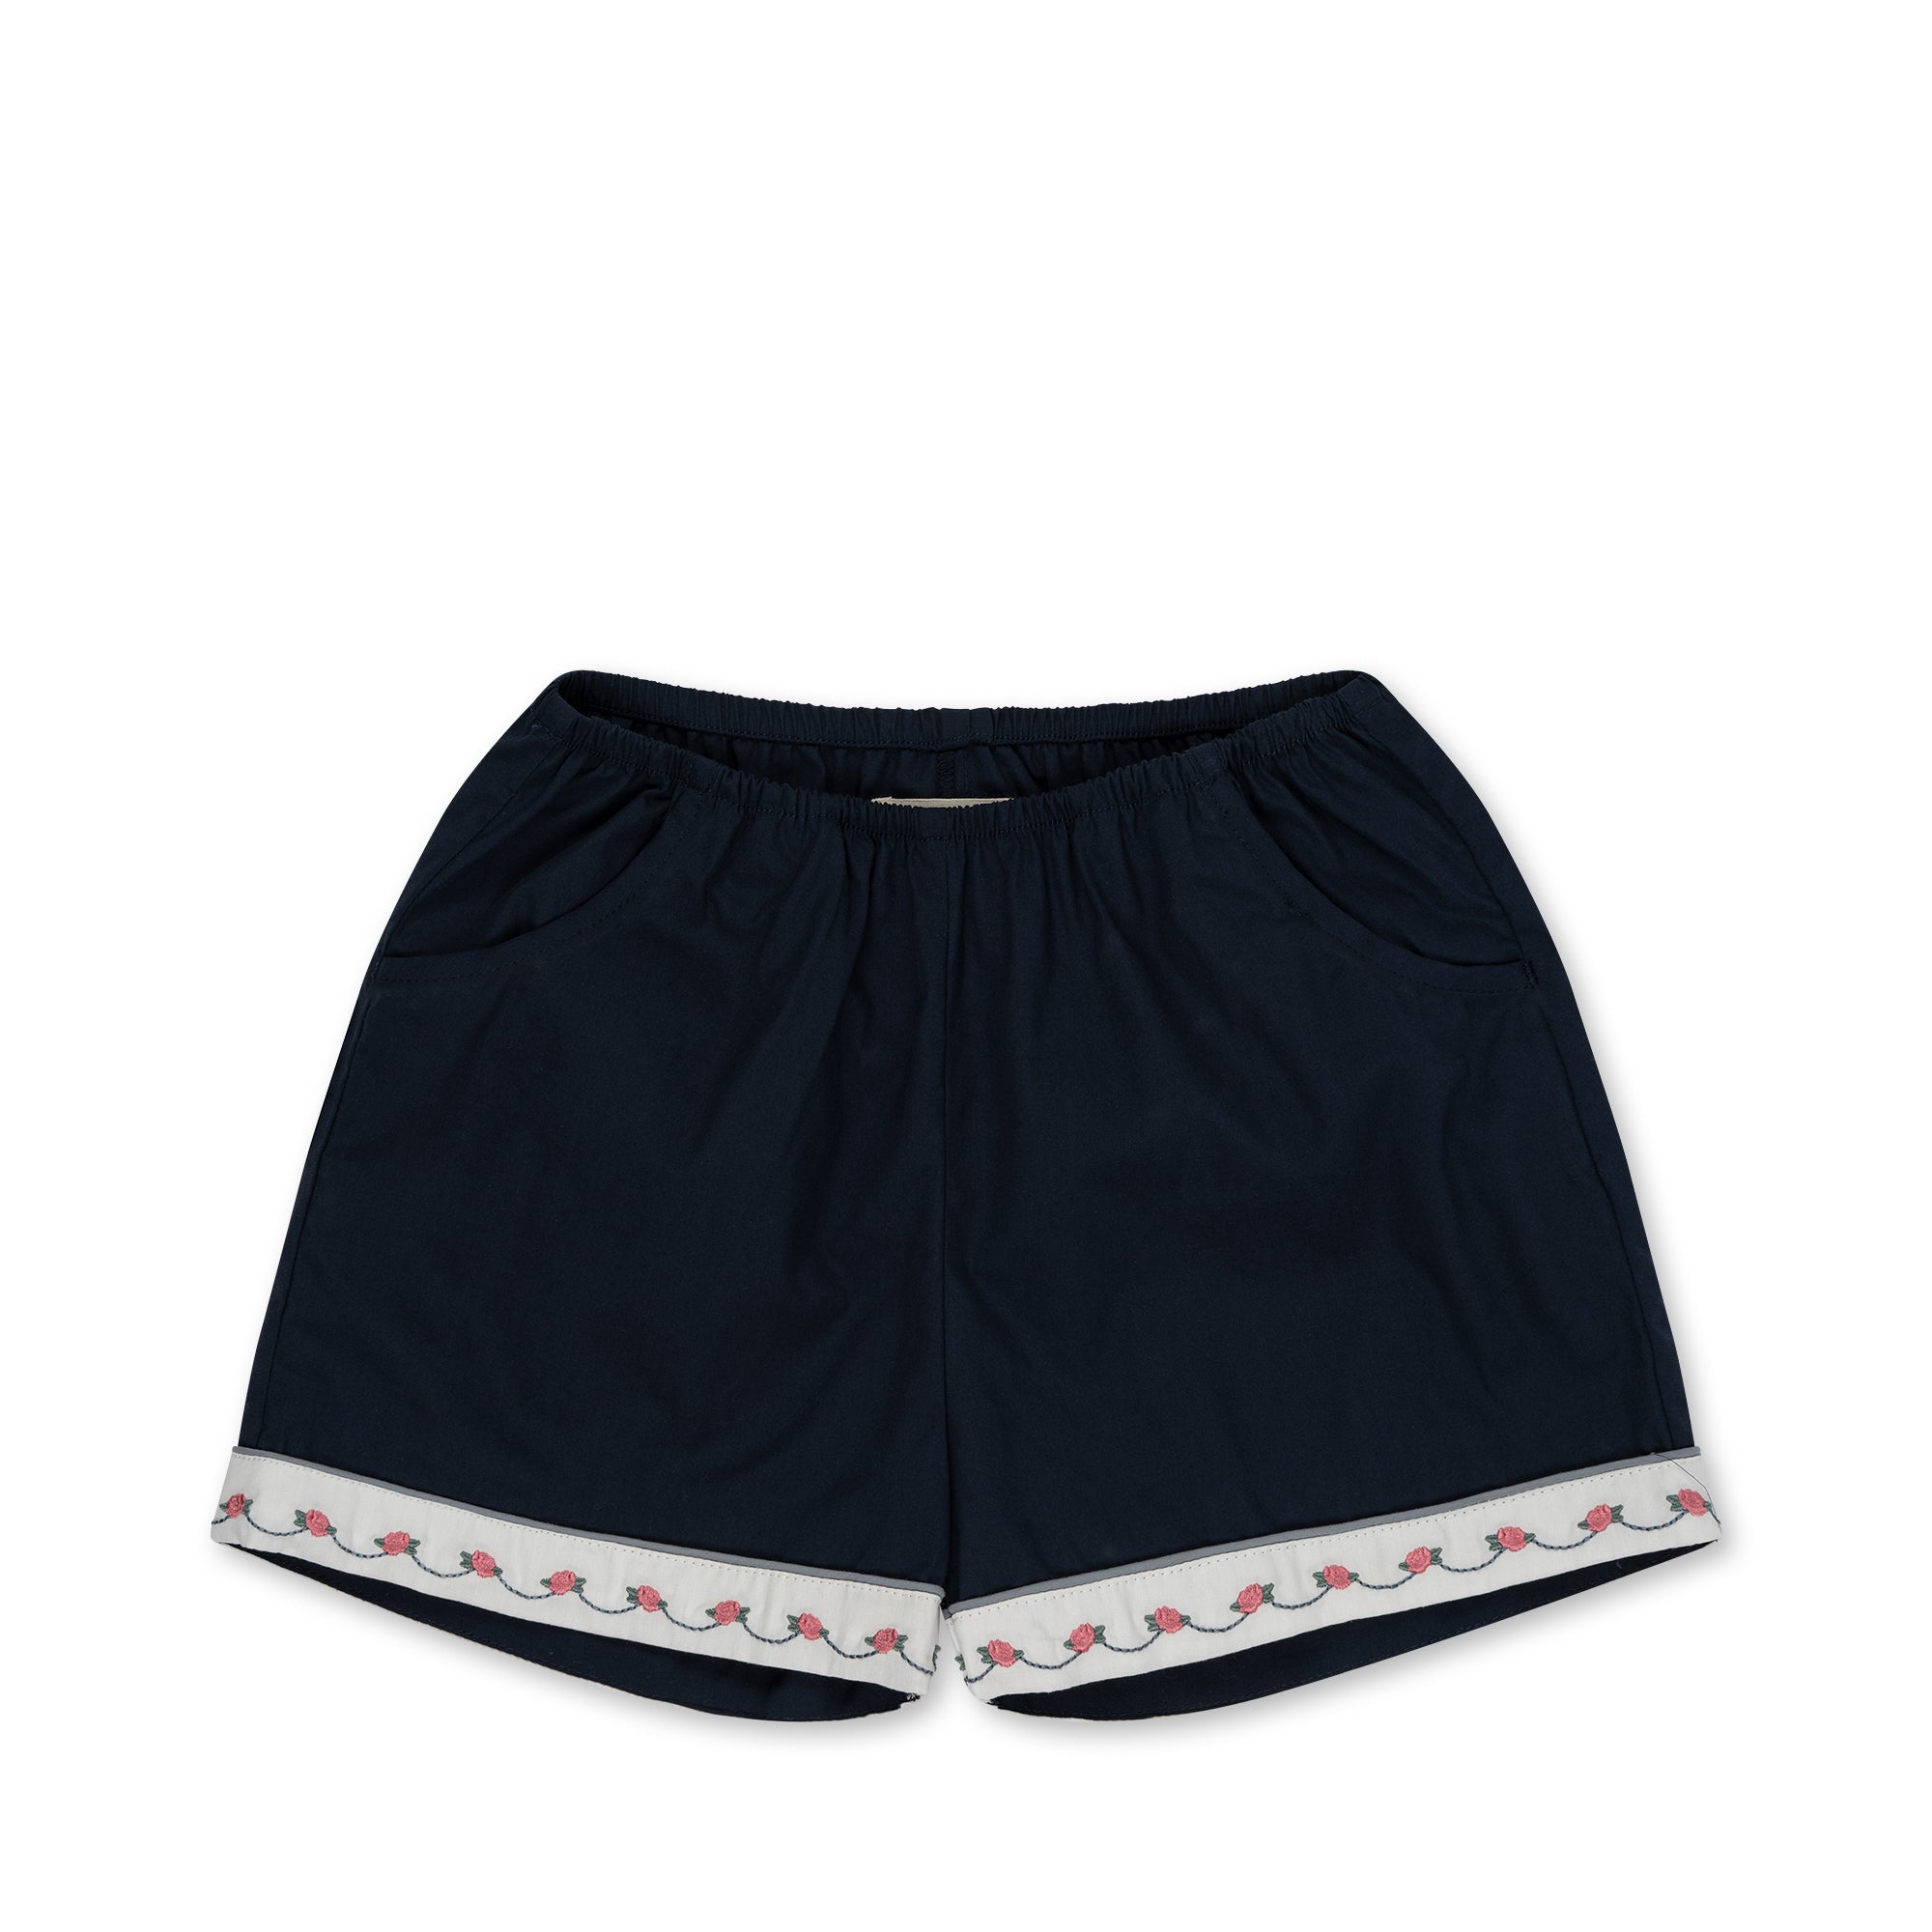 Konges Sløjd A/S NIA SHORTS Shorts and bloomers - Woven TOTAL ECLIPSE